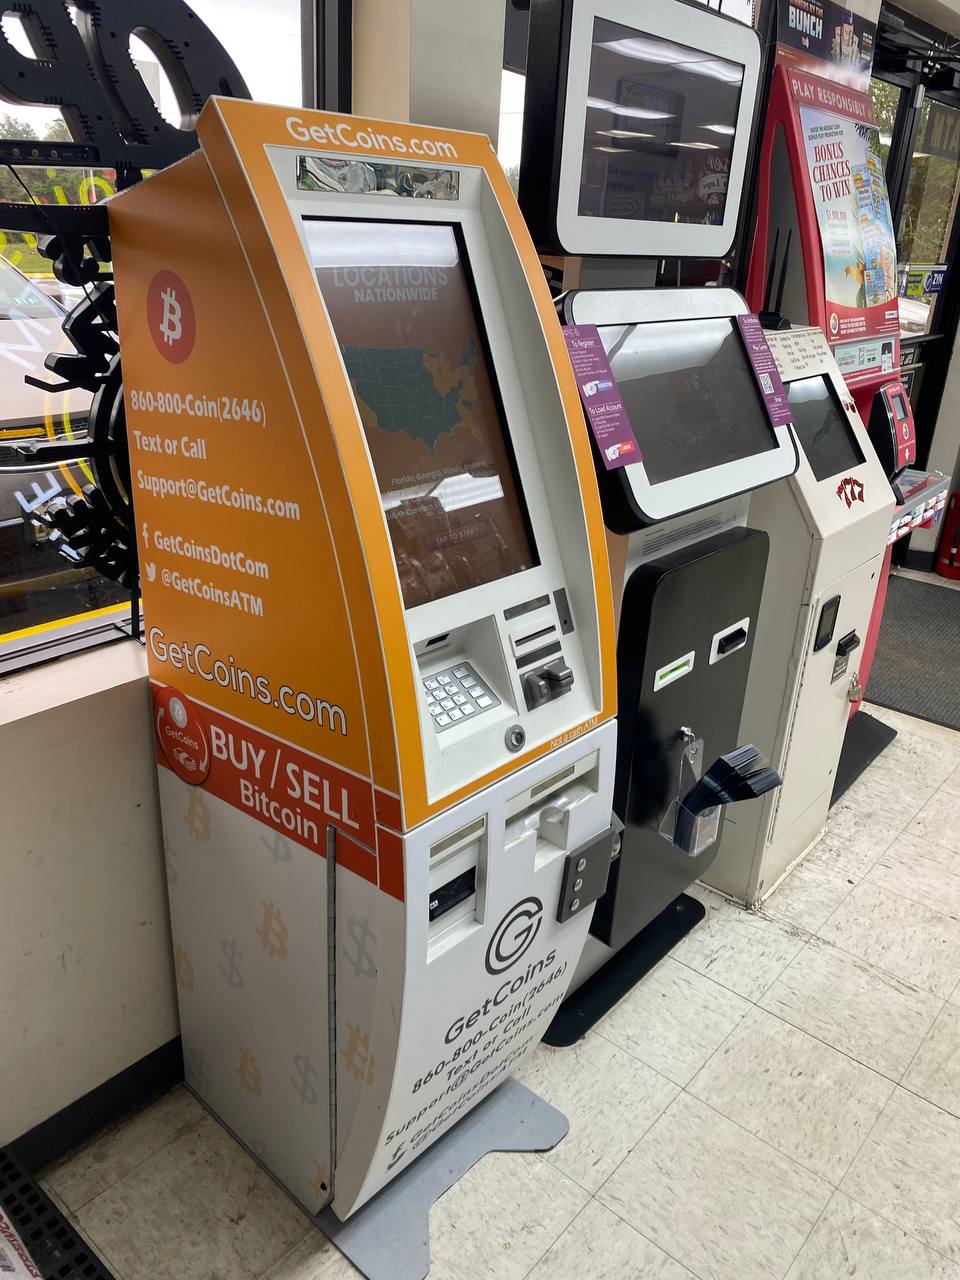 Getcoins - Bitcoin ATM - Inside of Speedway Food Mart in St. Augustine, Florida